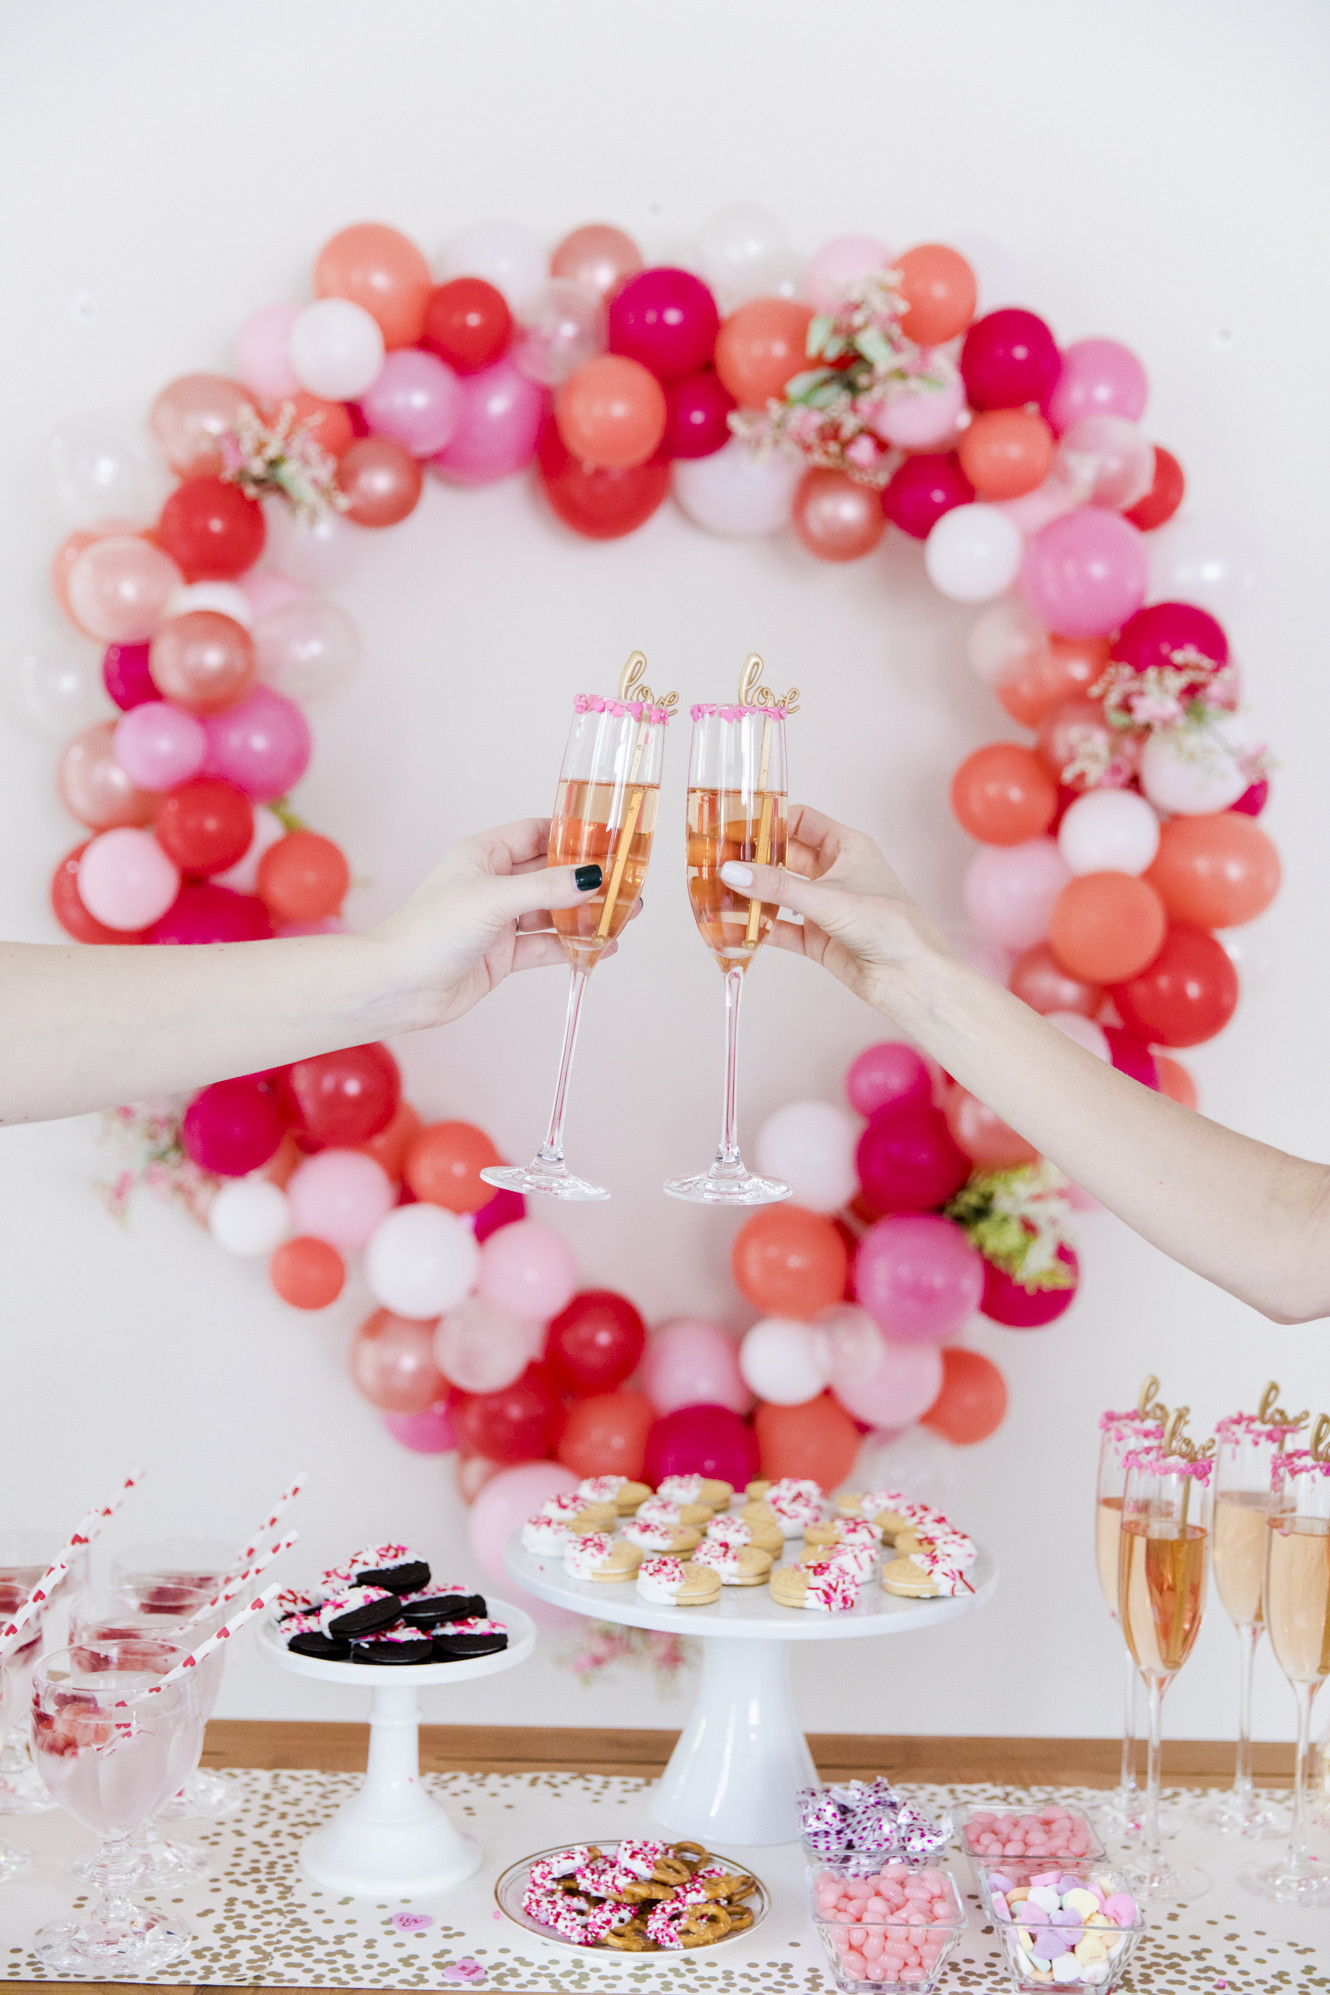 Valentines Birthday Gift Ideas
 Six Ideas for throwing the Best Valentine s Day Party